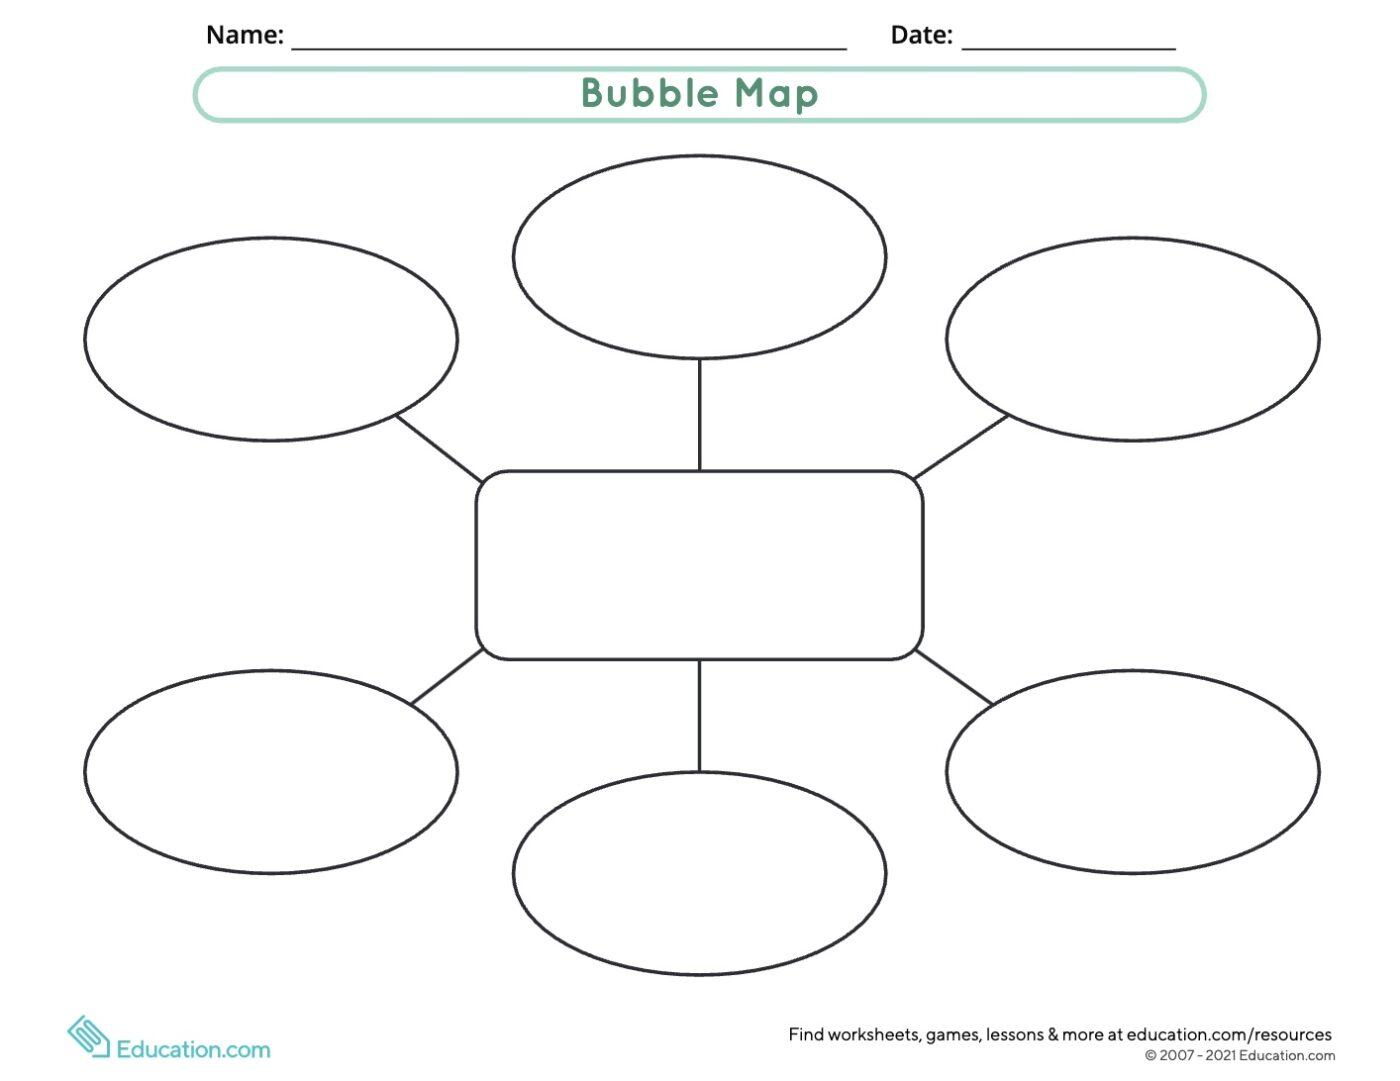 Top 10 Bubble Map Templates to Visualize and Connect Ideas ClickUp